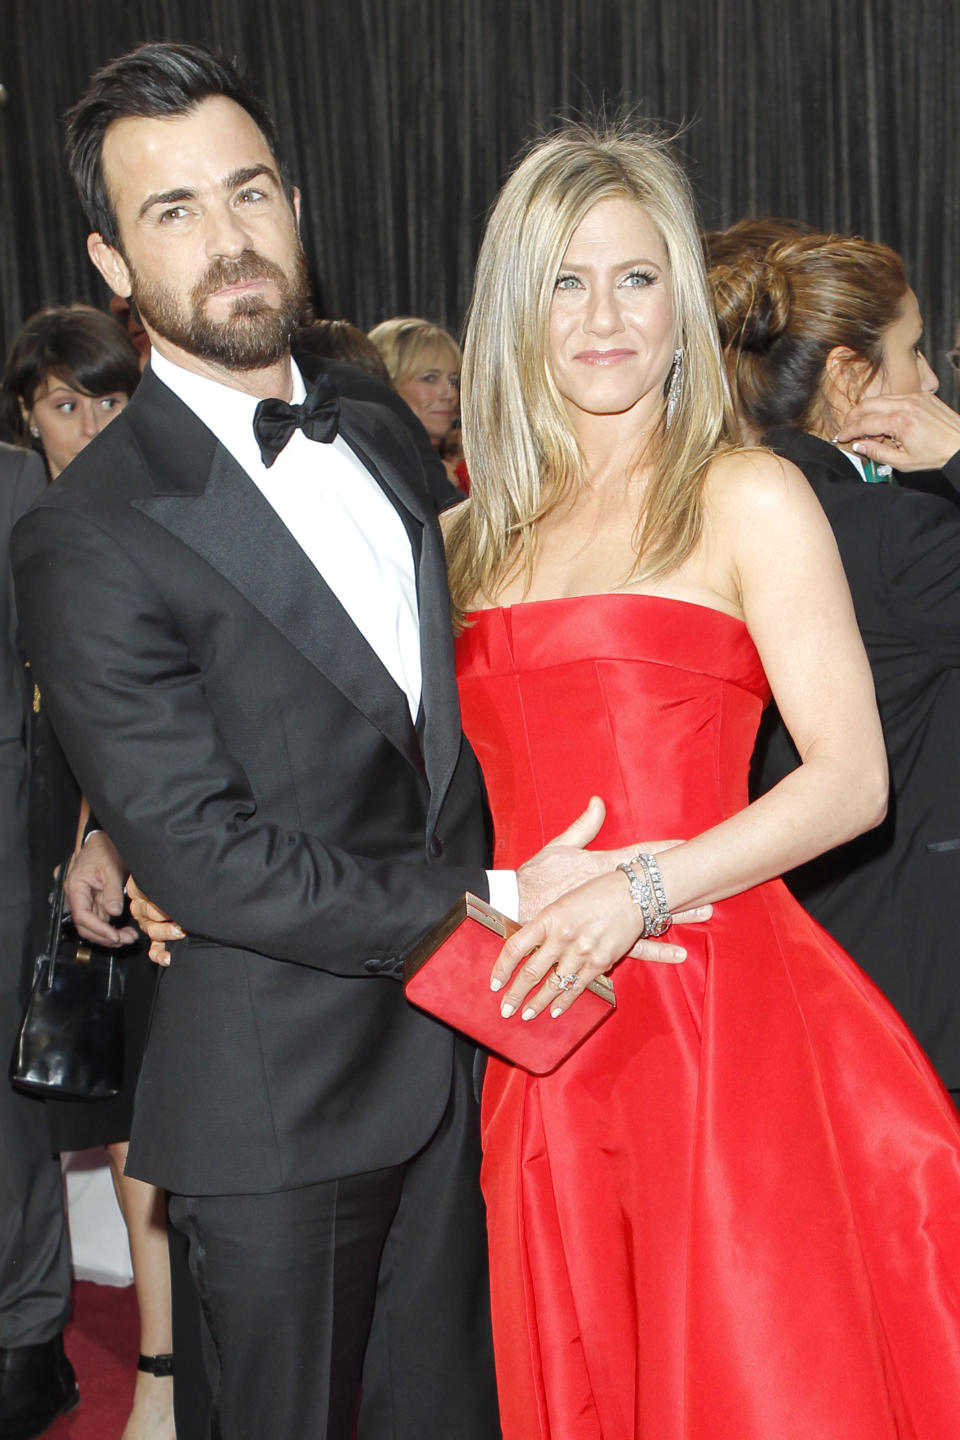 Justin Theroux (L) and Jennifer Aniston attend the 85th annual Academy Awards at the Dolby Theatre. Aniston wears Fred Leighton jewelry with a Salvatore Ferragamo clutch. Theroux wears a Salvatore Ferragamo suit. (Photo by Donato Sardella/WWD/Penske Media via Getty Images)